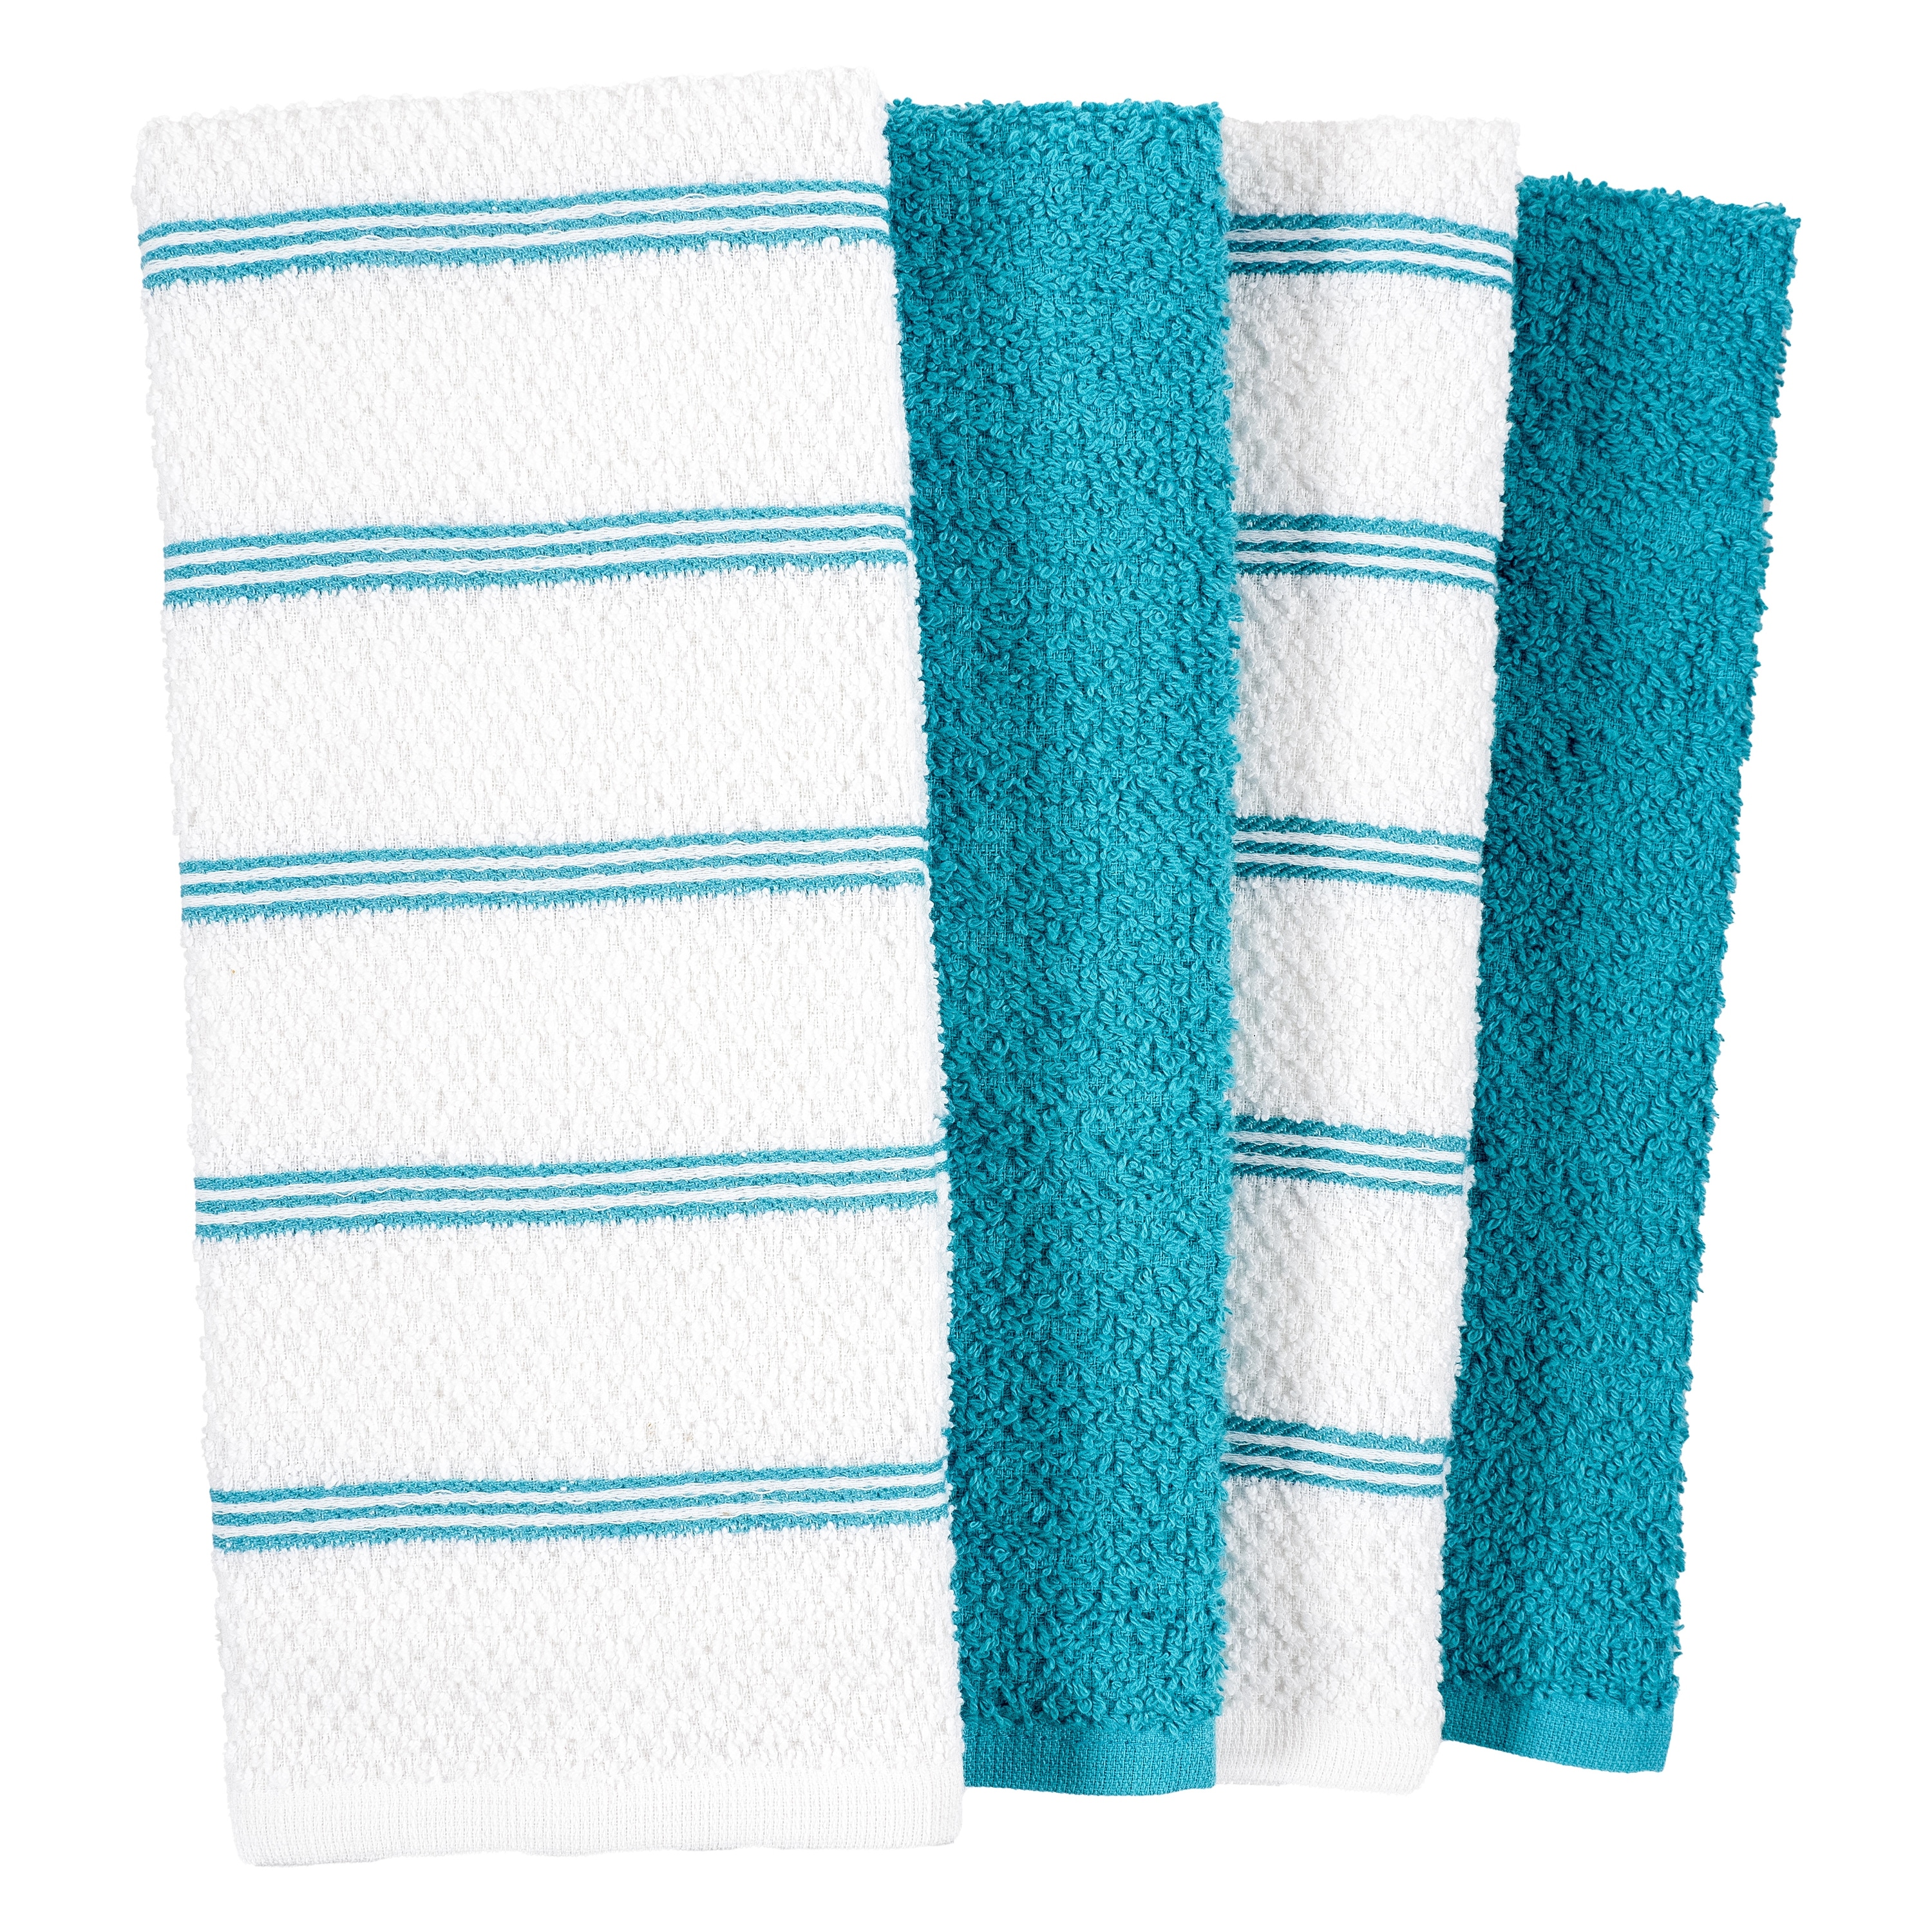 https://ak1.ostkcdn.com/images/products/is/images/direct/5c96ae7a5d610a3a4423c33394df6dd5b42d8b2f/Piedmont-Cotton-Kitchen-Towels%2C-Set-of-8.jpg